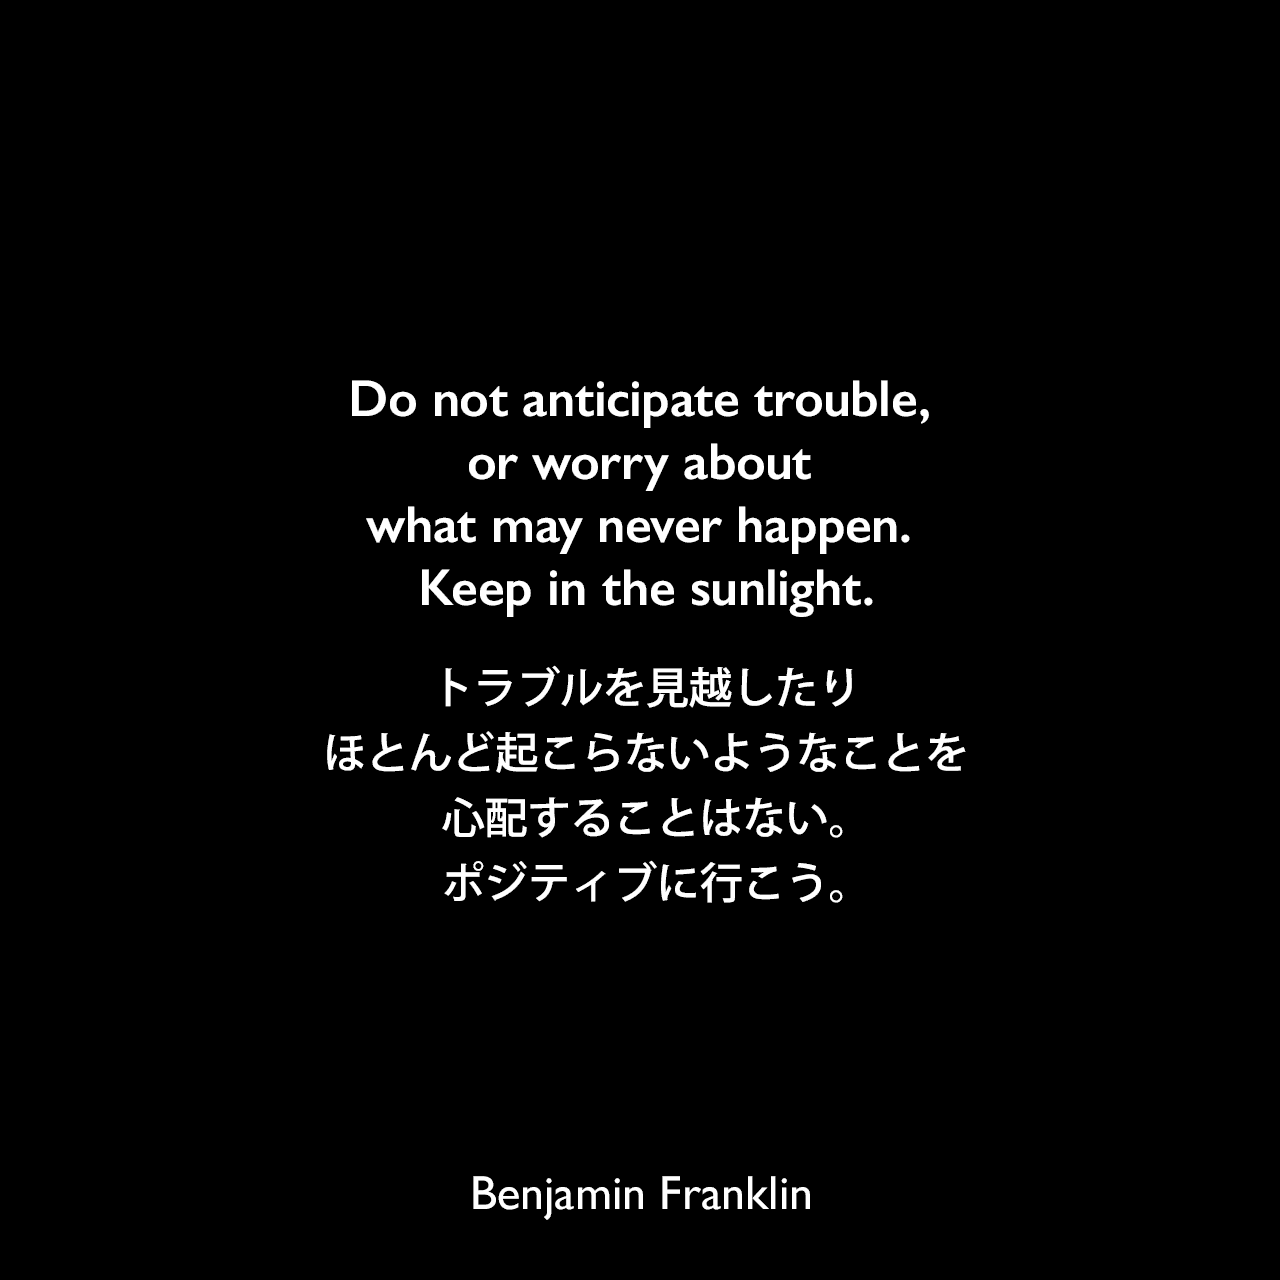 Do not anticipate trouble, or worry about what may never happen. Keep in the sunlight.トラブルを見越したり、ほとんど起こらないようなことを心配することはない。ポジティブに行こう。- トライオン・エドワーズによる本「A dictionary of thoughts（1908年）」で引用Benjamin Franklin